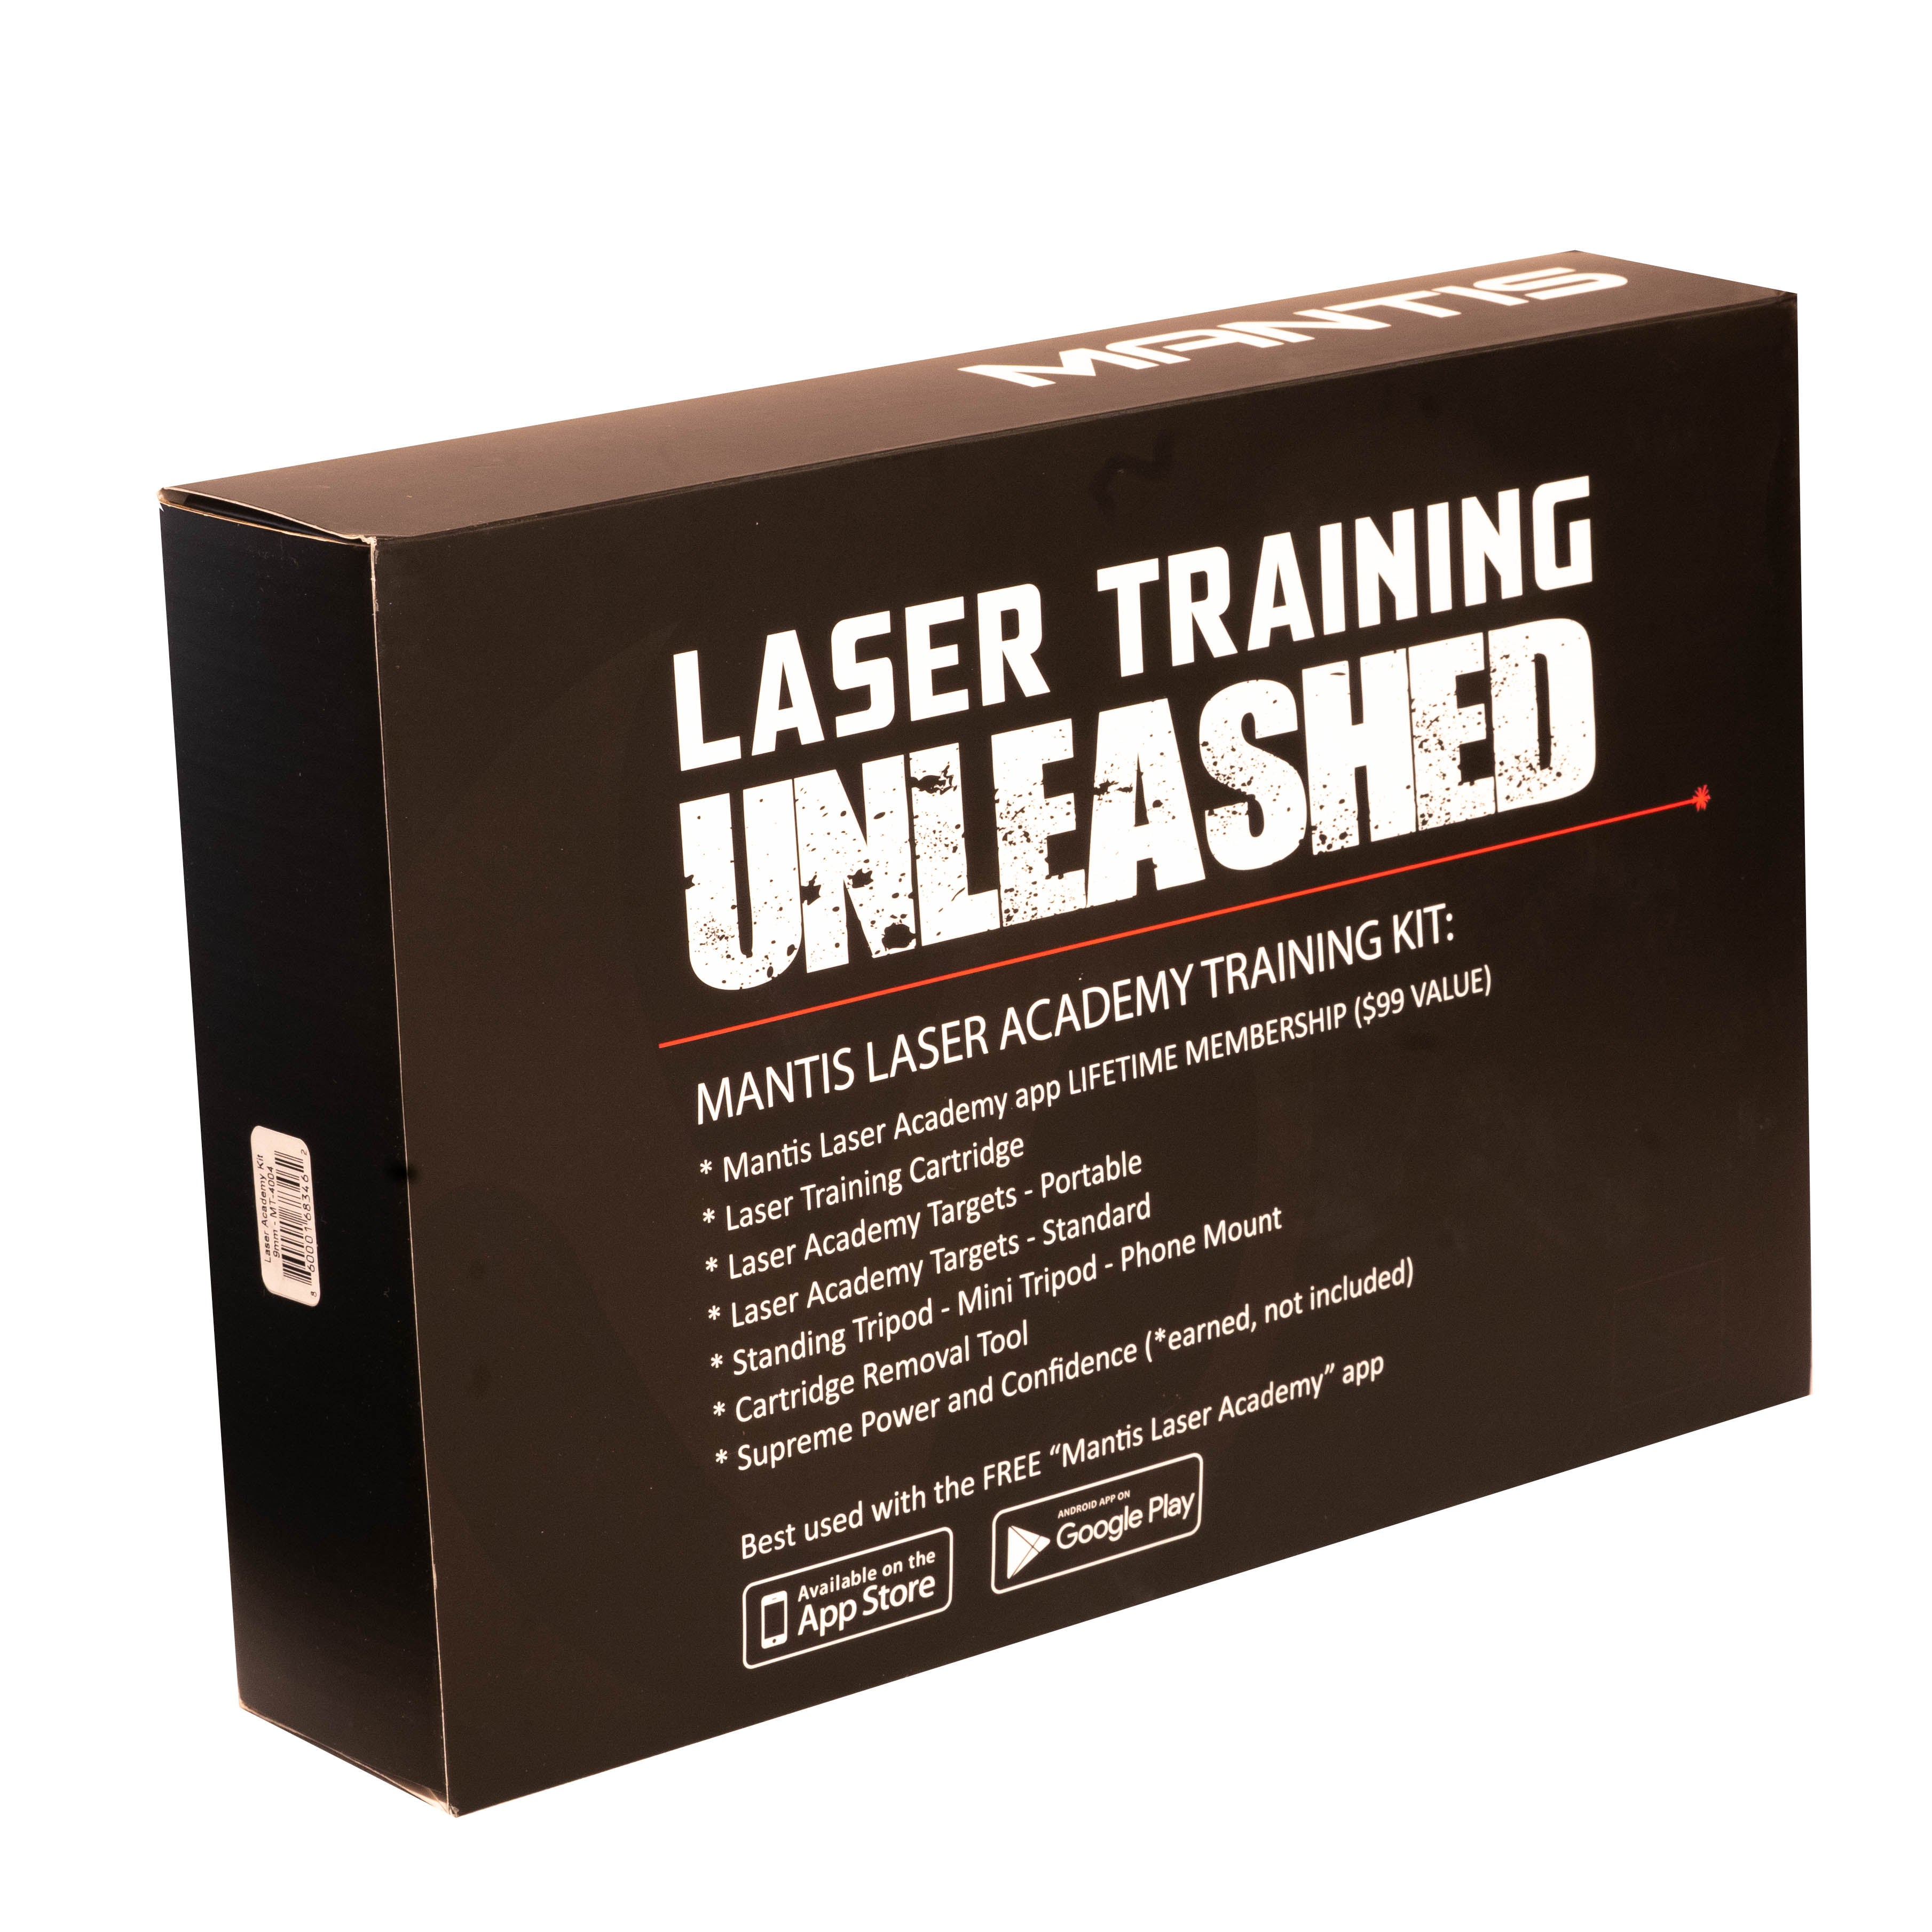 LASER X Two Player Laser Gaming Set, Multi, 2 Laser units with 2 Arms  Receivers 100' Range